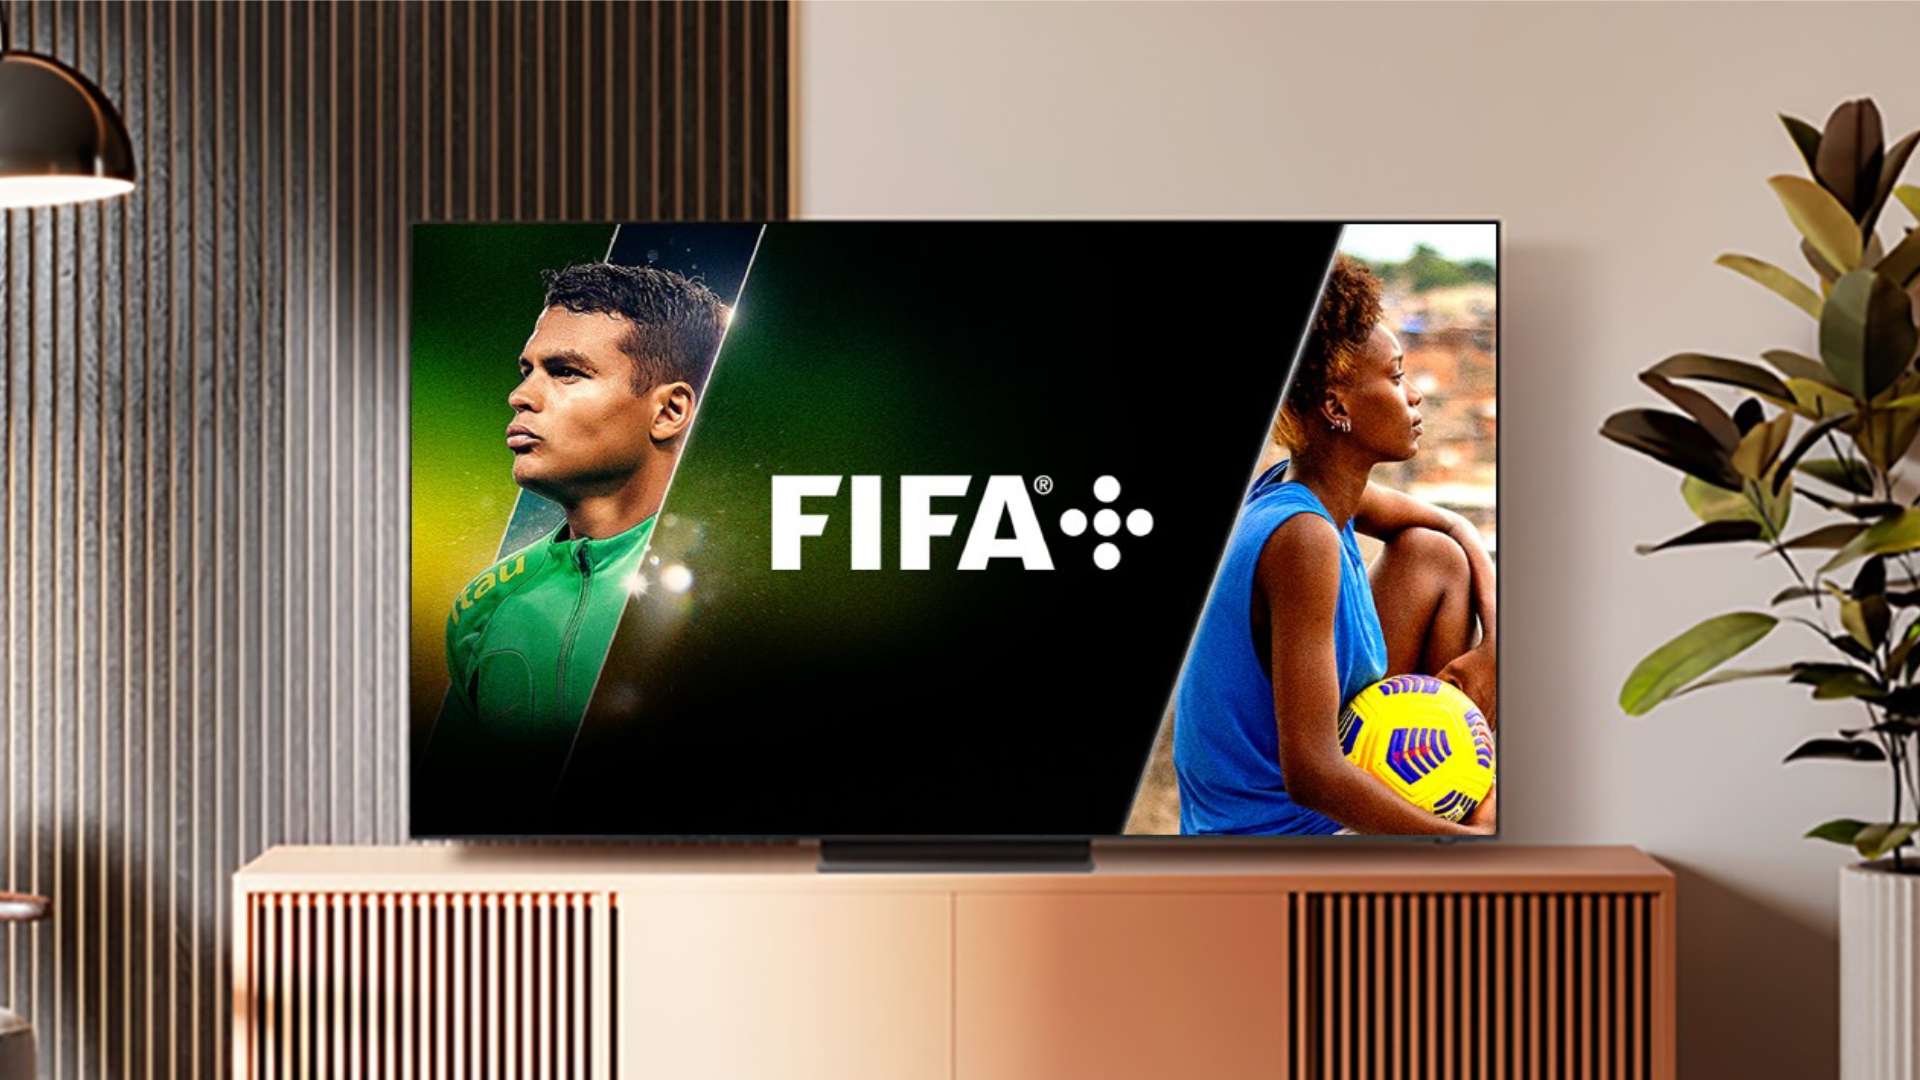 Samsung TV Plus gets FIFA+ channel just in time for FIFA Womens World Cup 